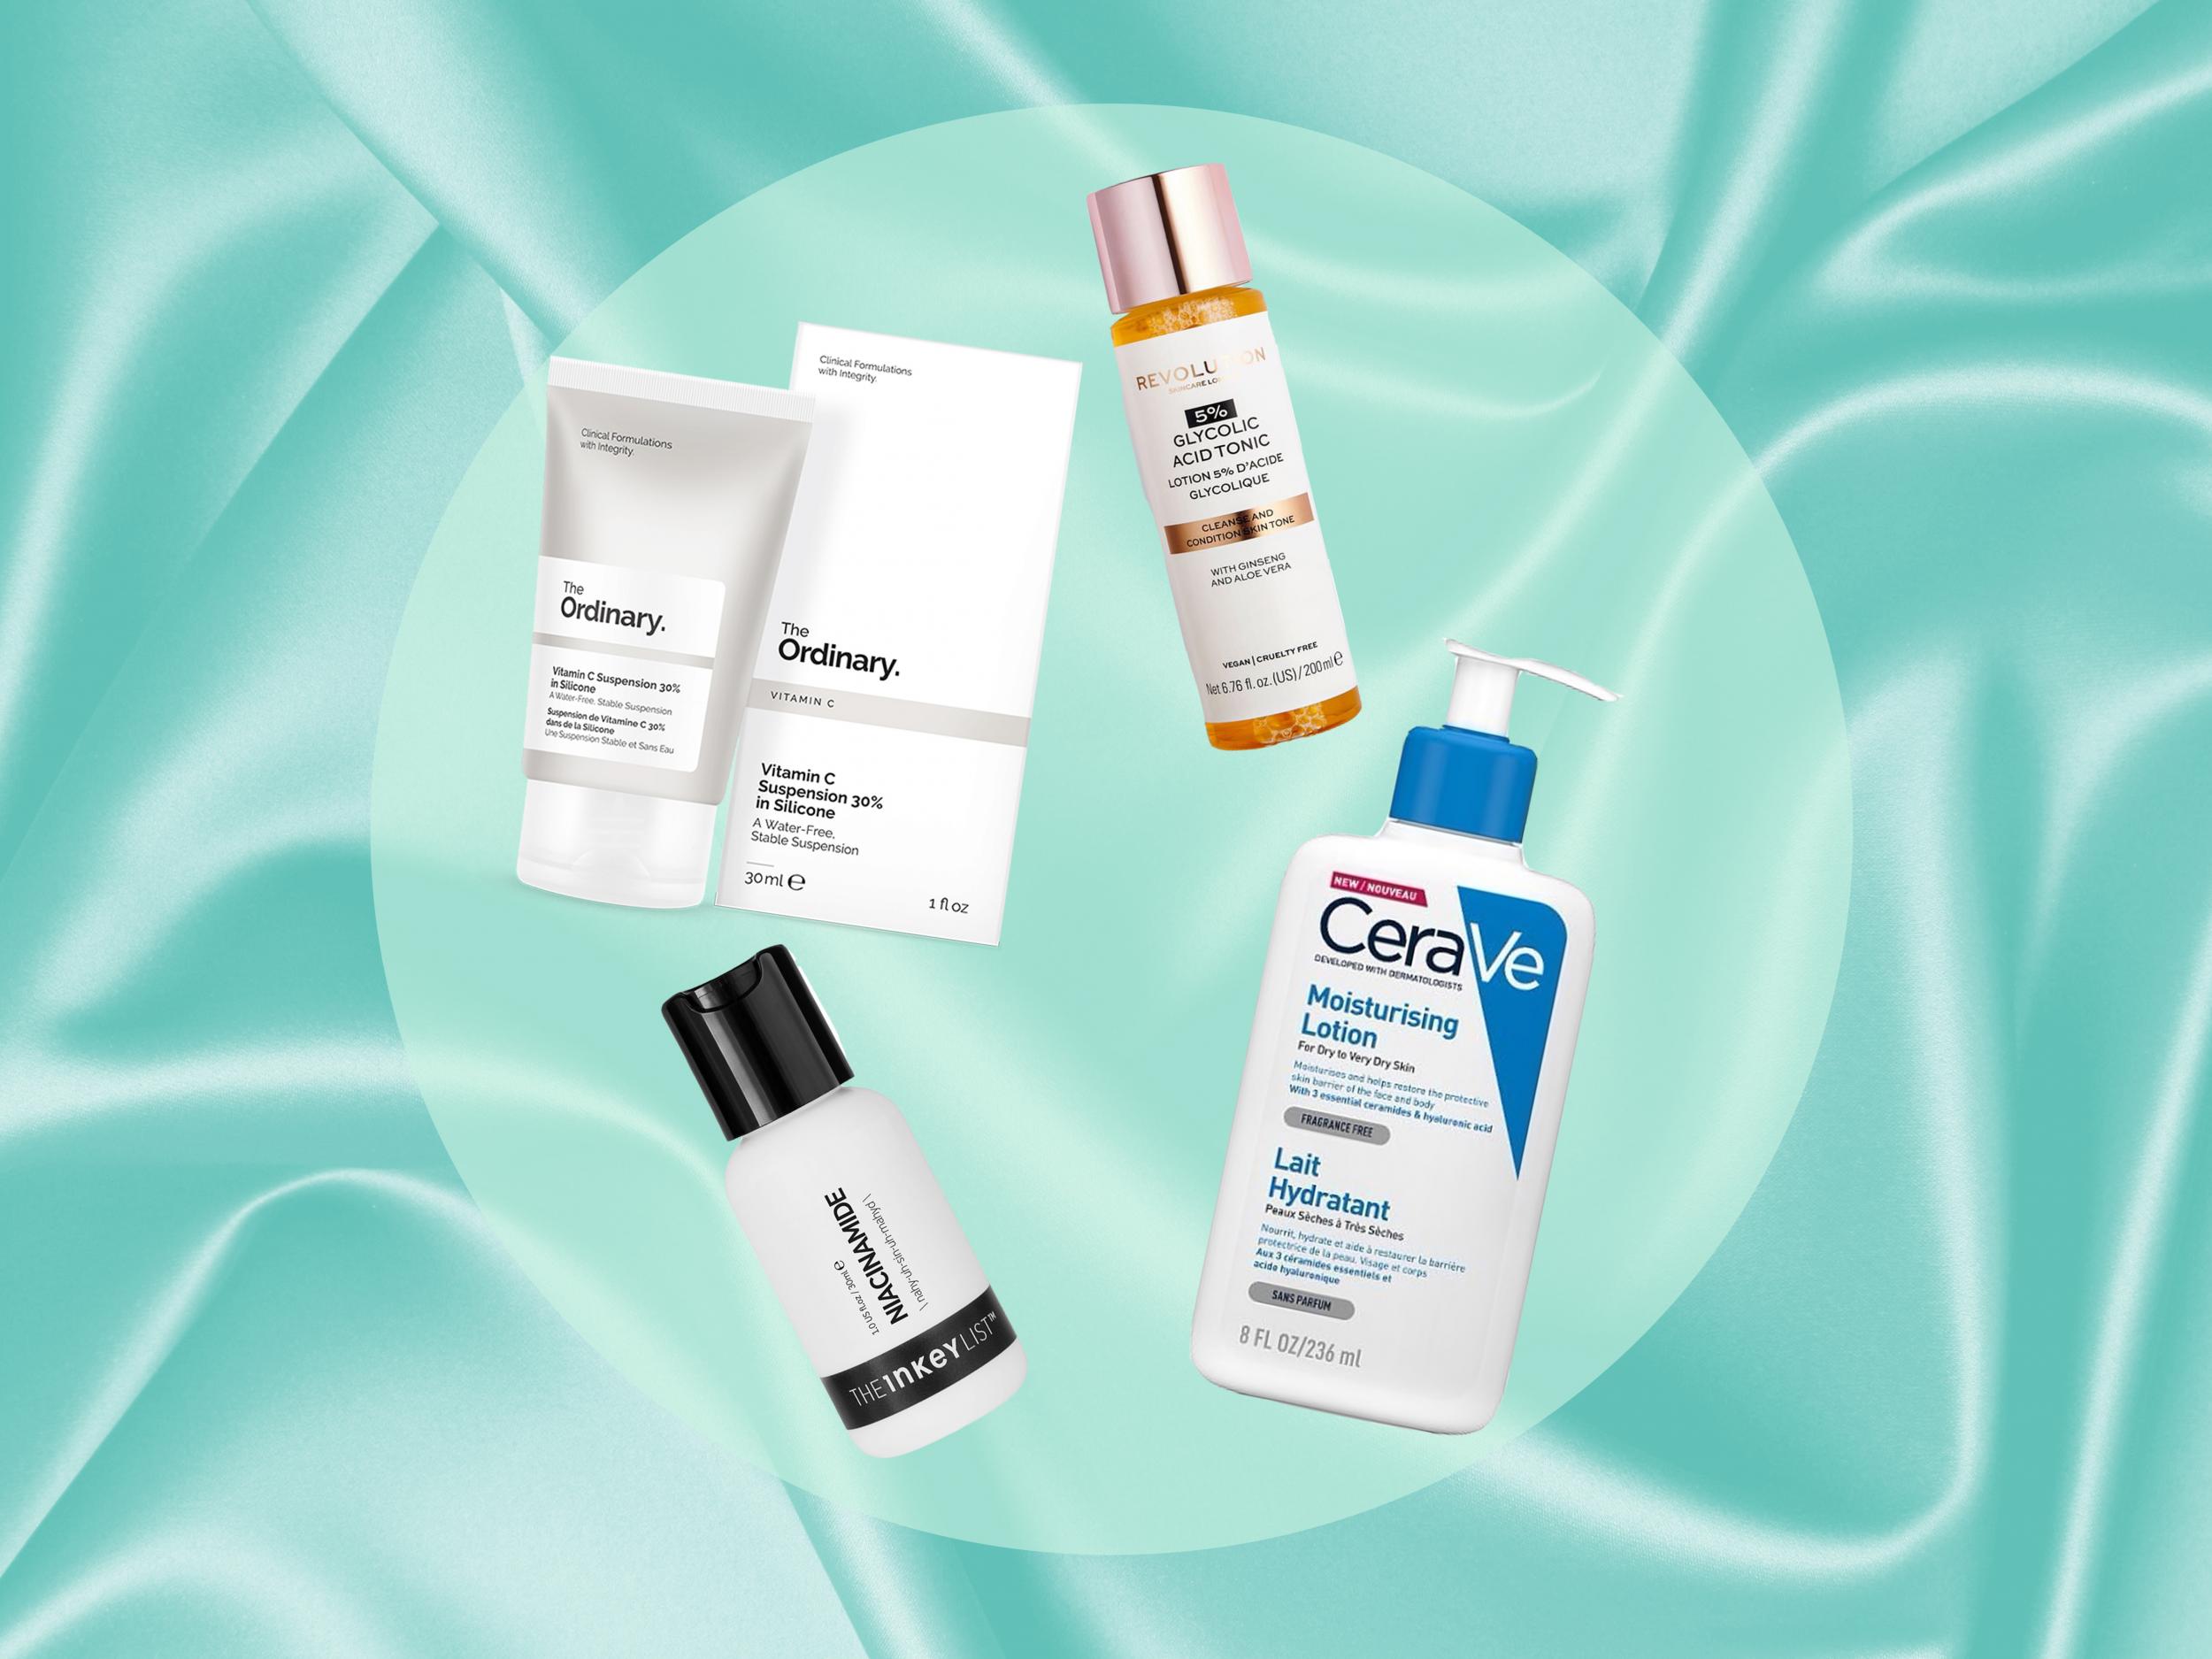 Best skincare products under £10: Budget beauty buys that actually work